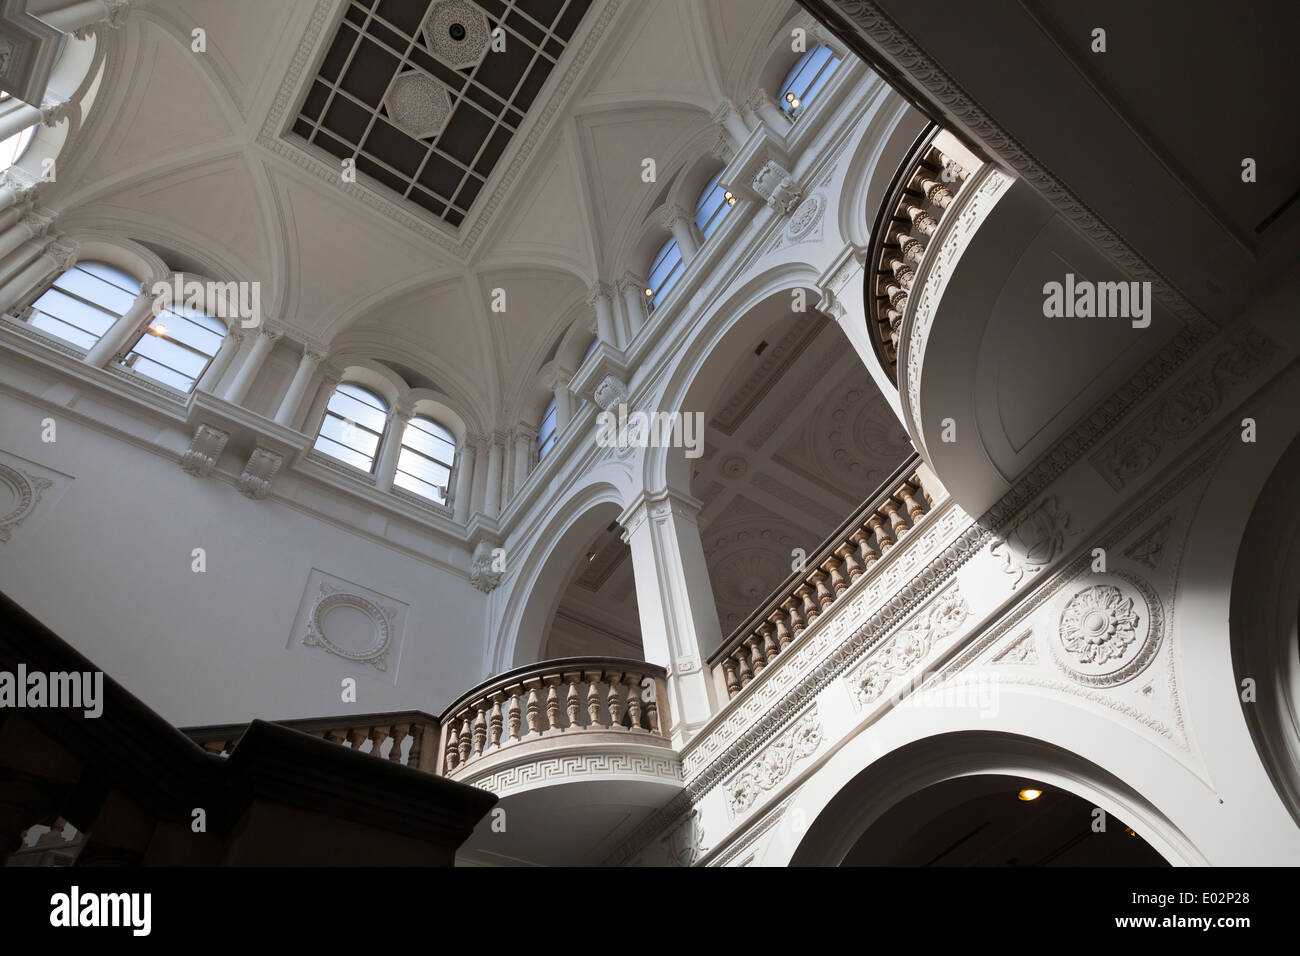 Architectural atrium in the Burlington Gardens building of the Royal Academy. Stock Photo